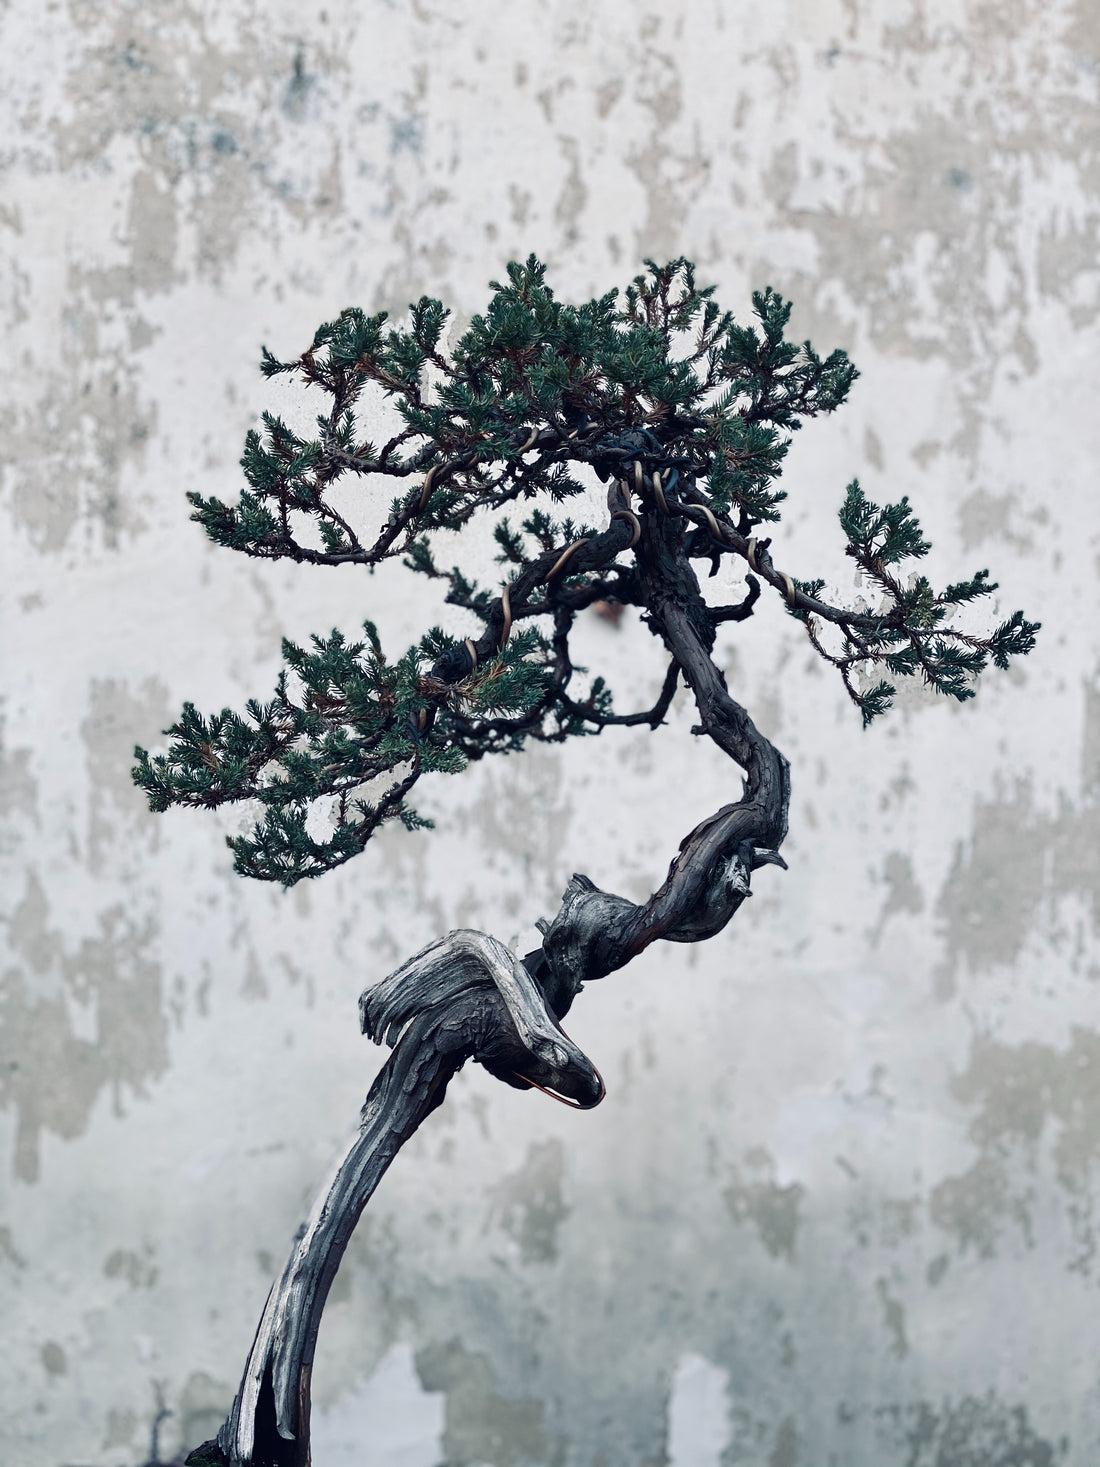 Bonsai Care 101: How to Keep Your Tree Thriving